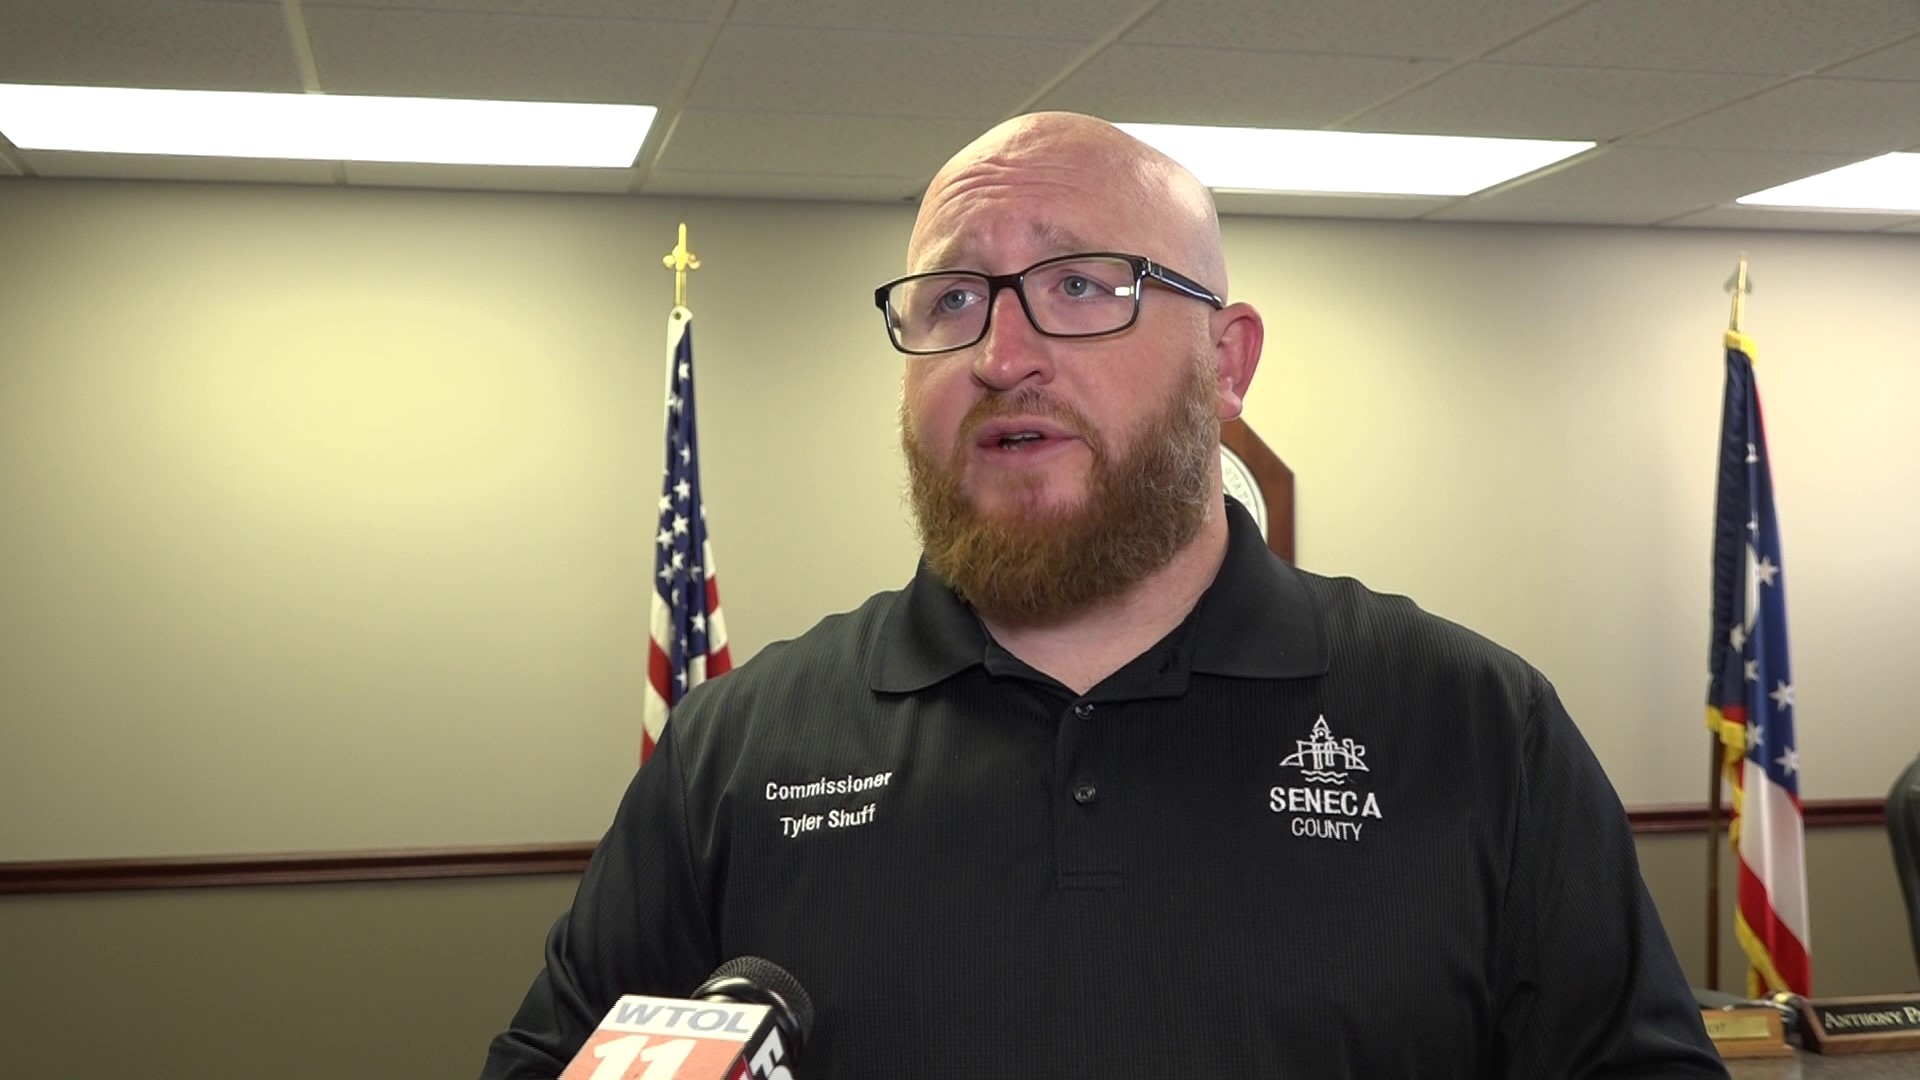 Tyler Shuff, vice chair of the Seneca County Board of Commissioners, was convicted of drunk driving after pleading no contest on April 19, 2022.